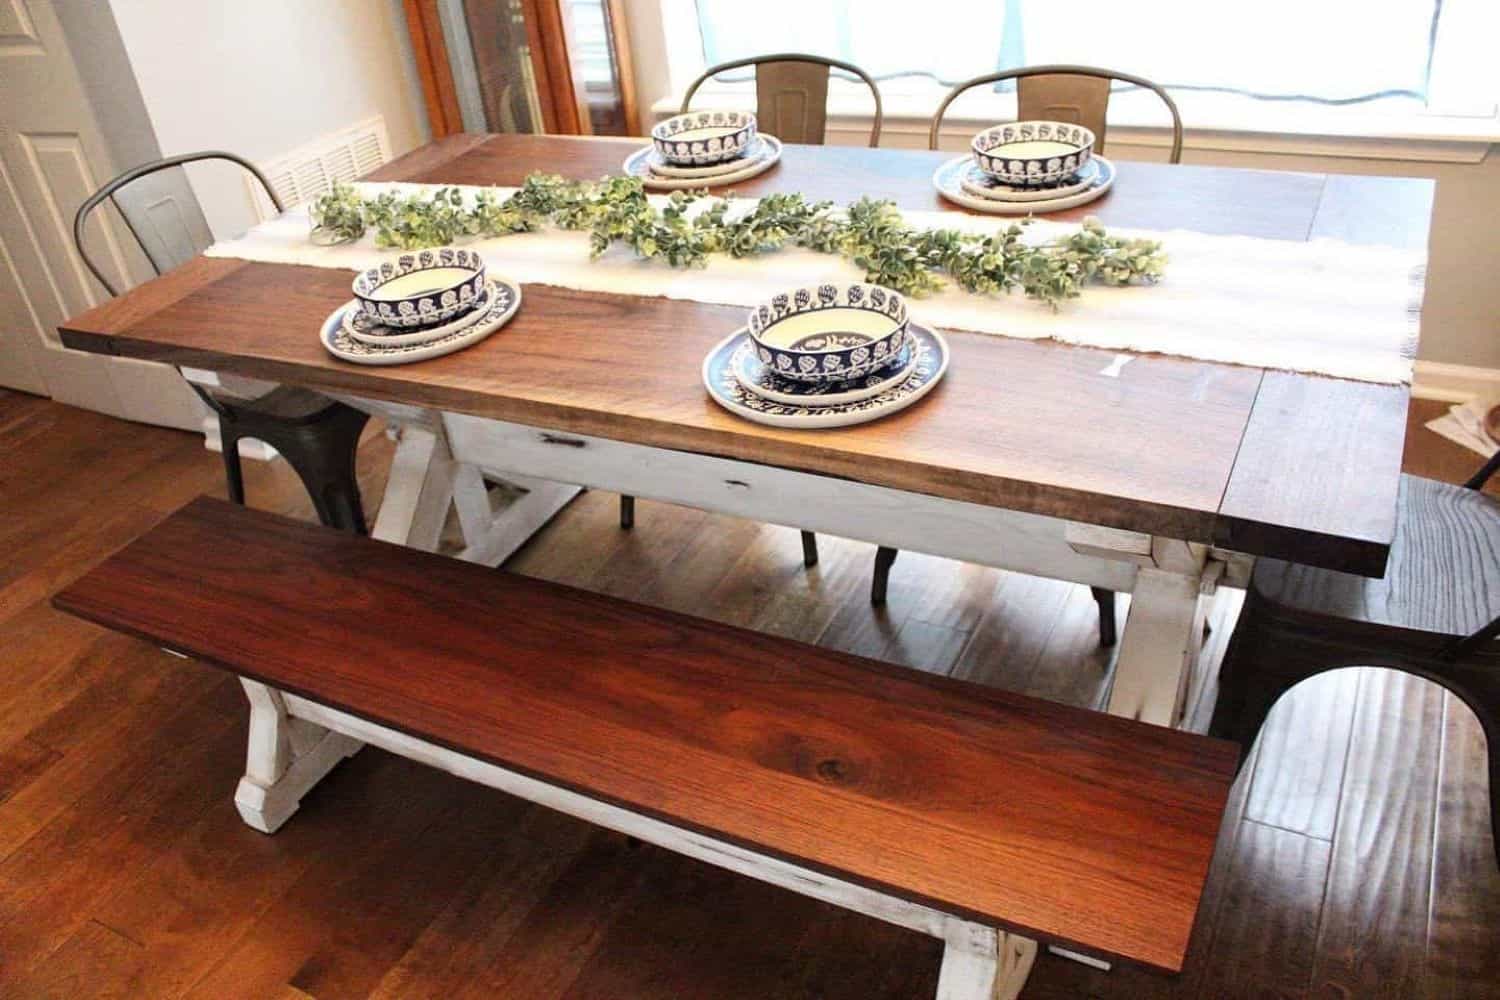 Handmade Trestle Dining table made in Georgetown Kentucky by Clines Crafted Woodworking LLC.